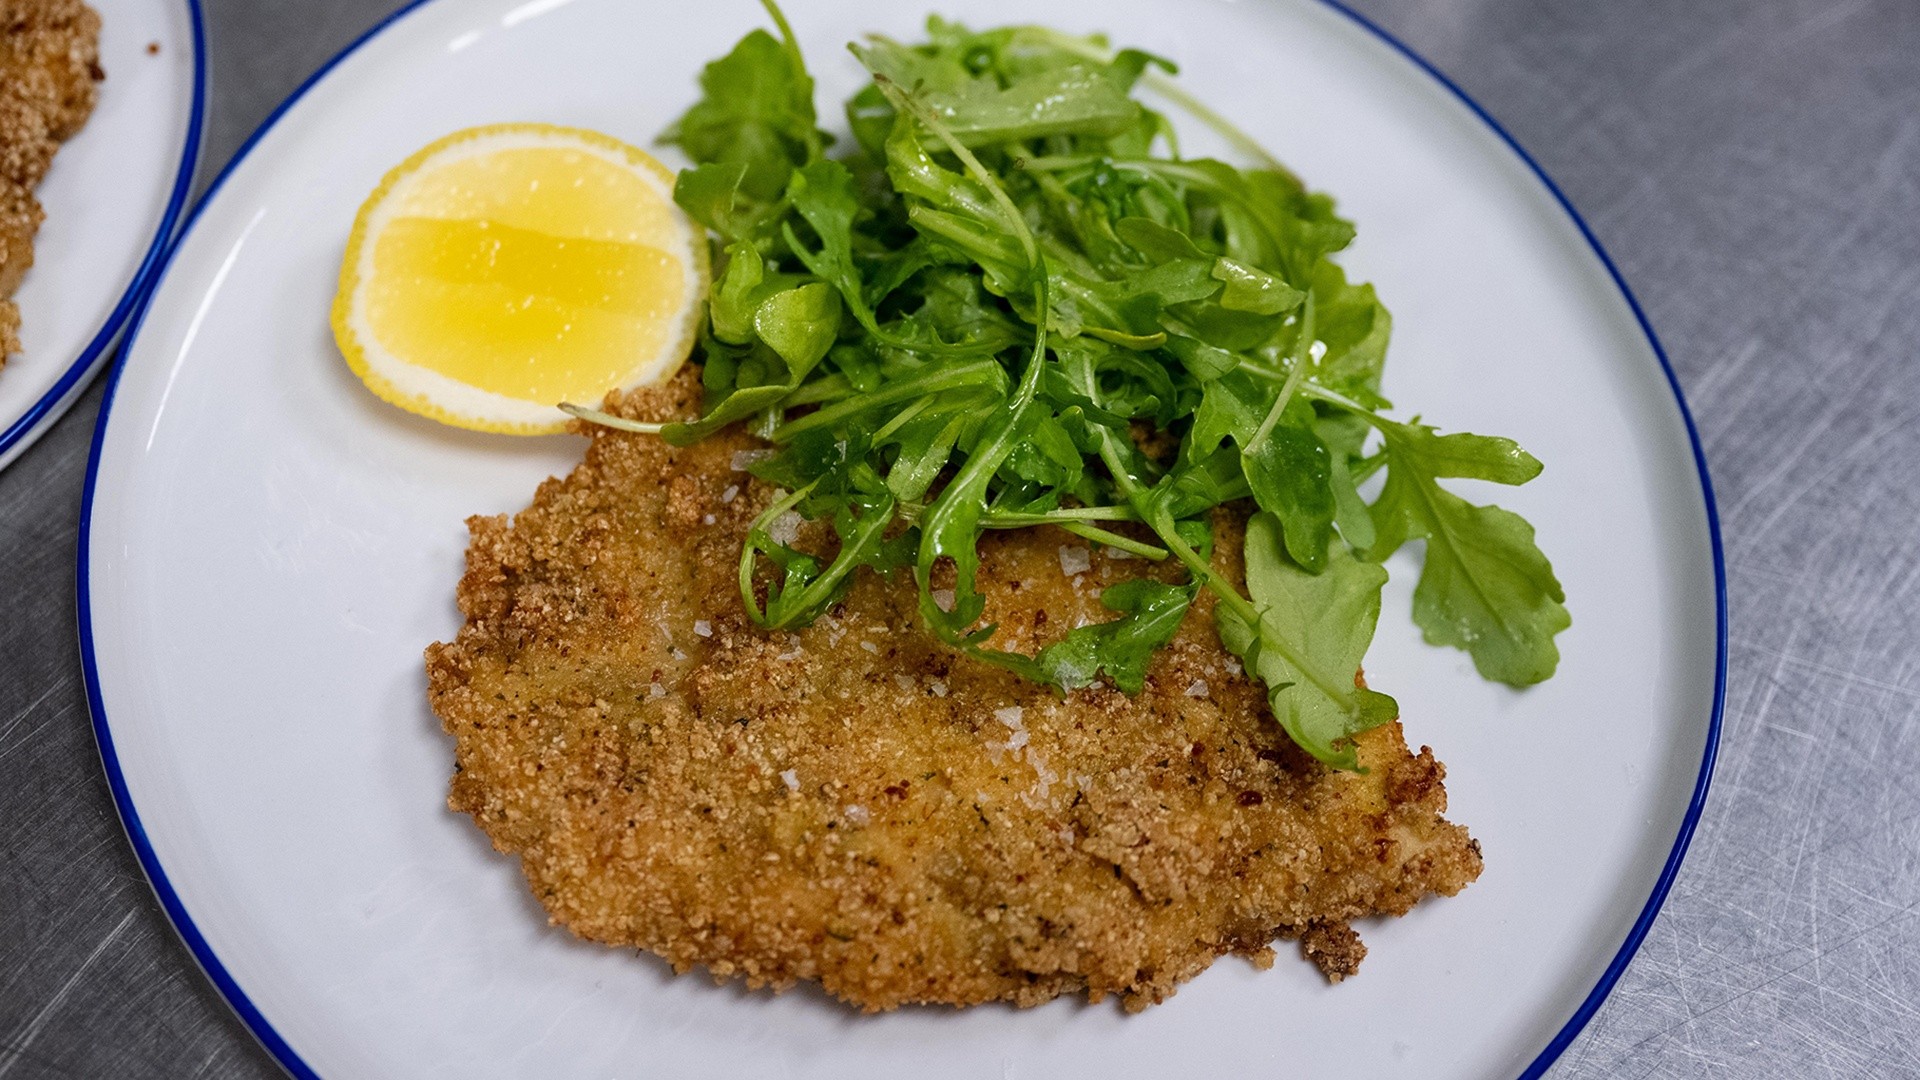 Cooking with Cal: Gluten-free chicken cutlets with arugula salad